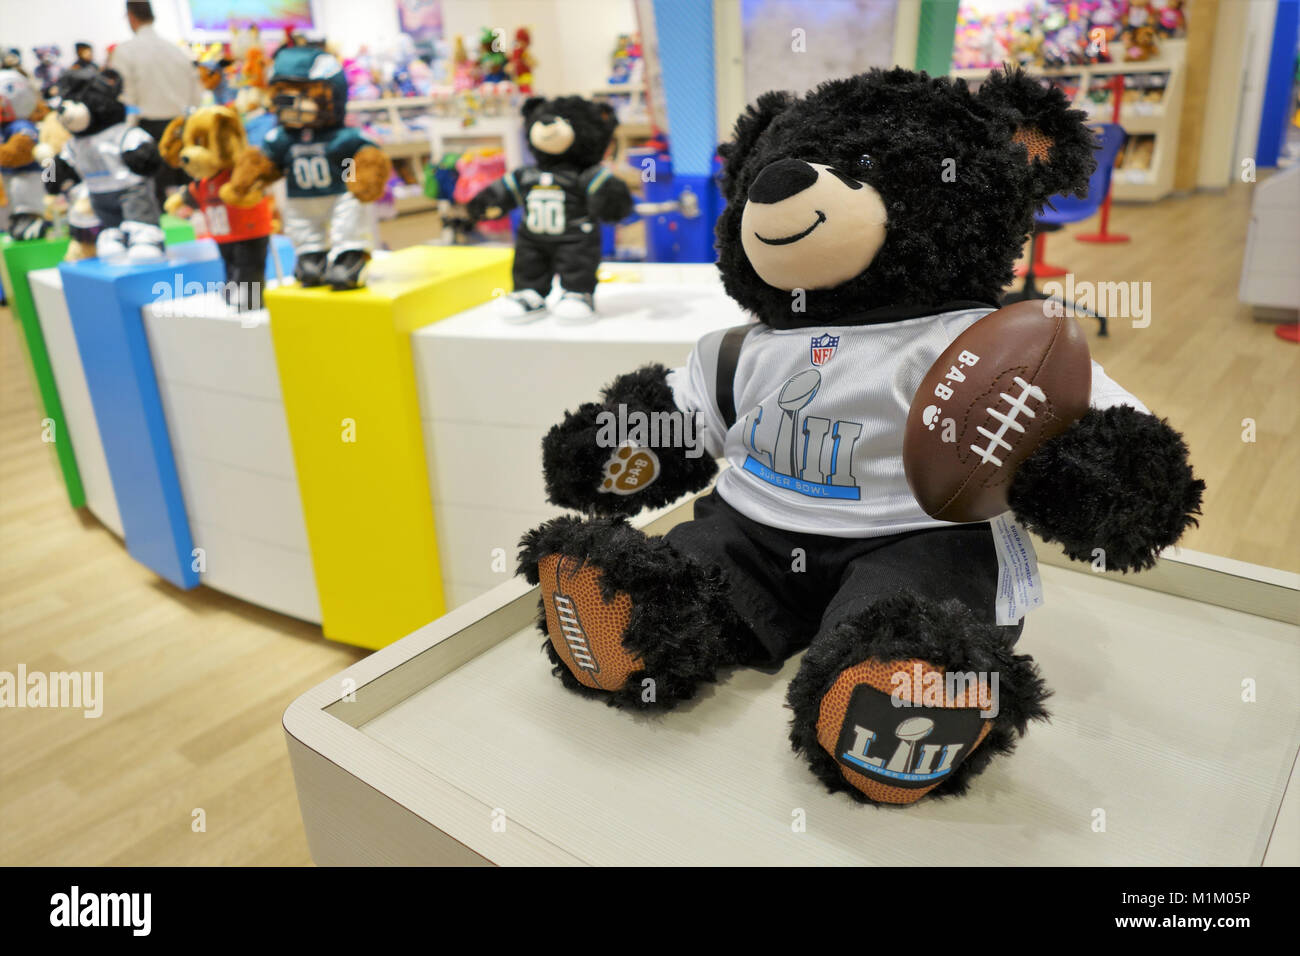 Minneapolis, Minnesota, USA. 31st January, 2018. A display of bears in football uniforms in honor of Super Bowl 2018 at the Build A Bear Workshop in the Mall of America in Minneapolis, Minnesota, USA. Copyright: Gina Kelly/Alamy Live News Stock Photo